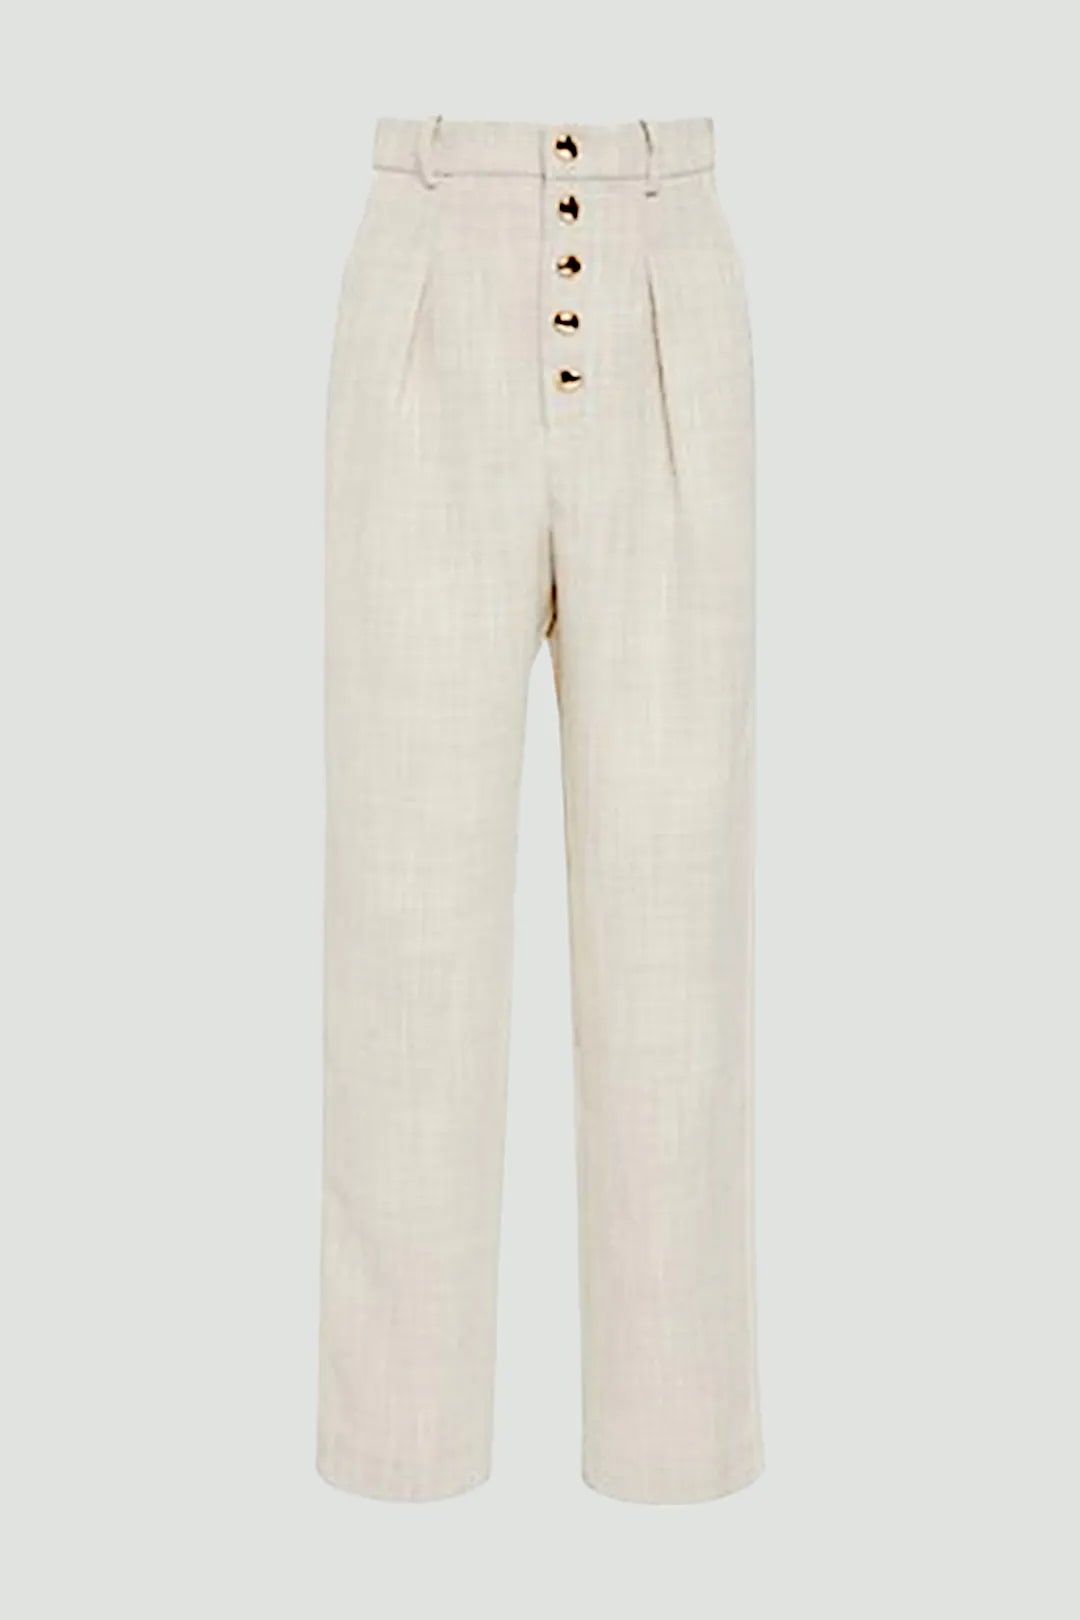 Acler Tweed High Waist Pants in Beige, perfect for formal occasions, available for purchase